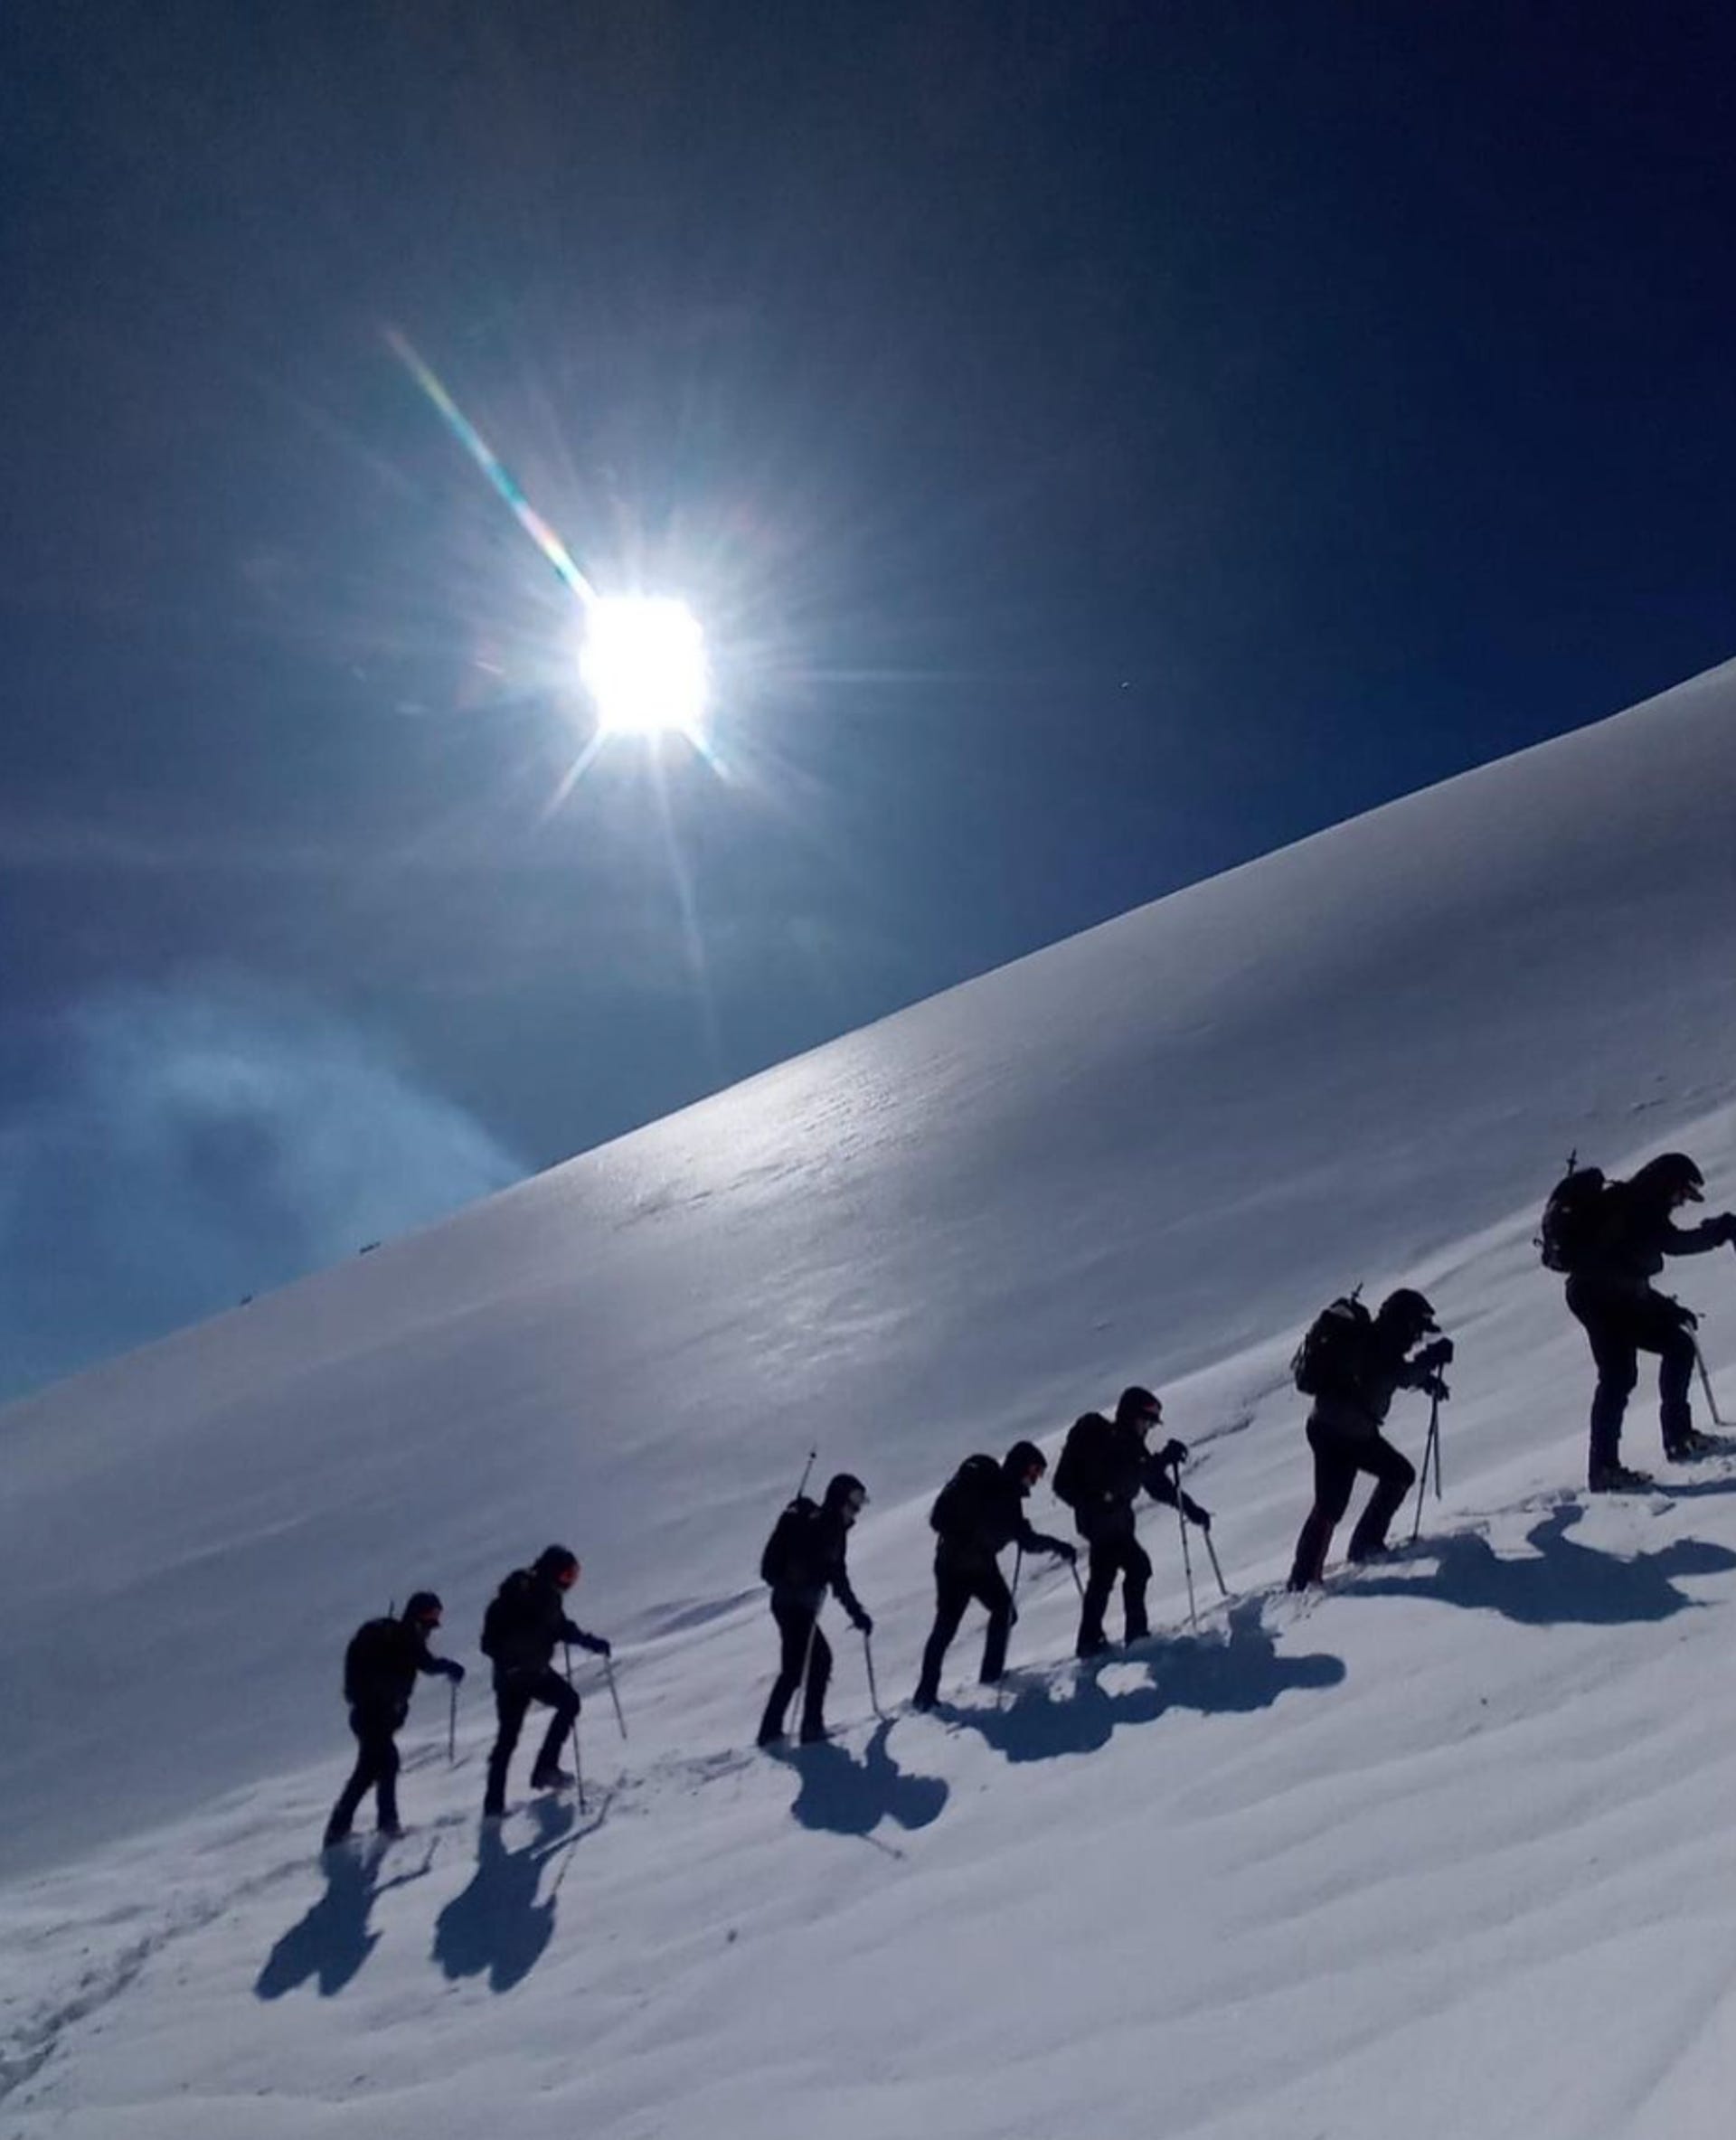 A line of hikers ascend a steep, snowy landscape